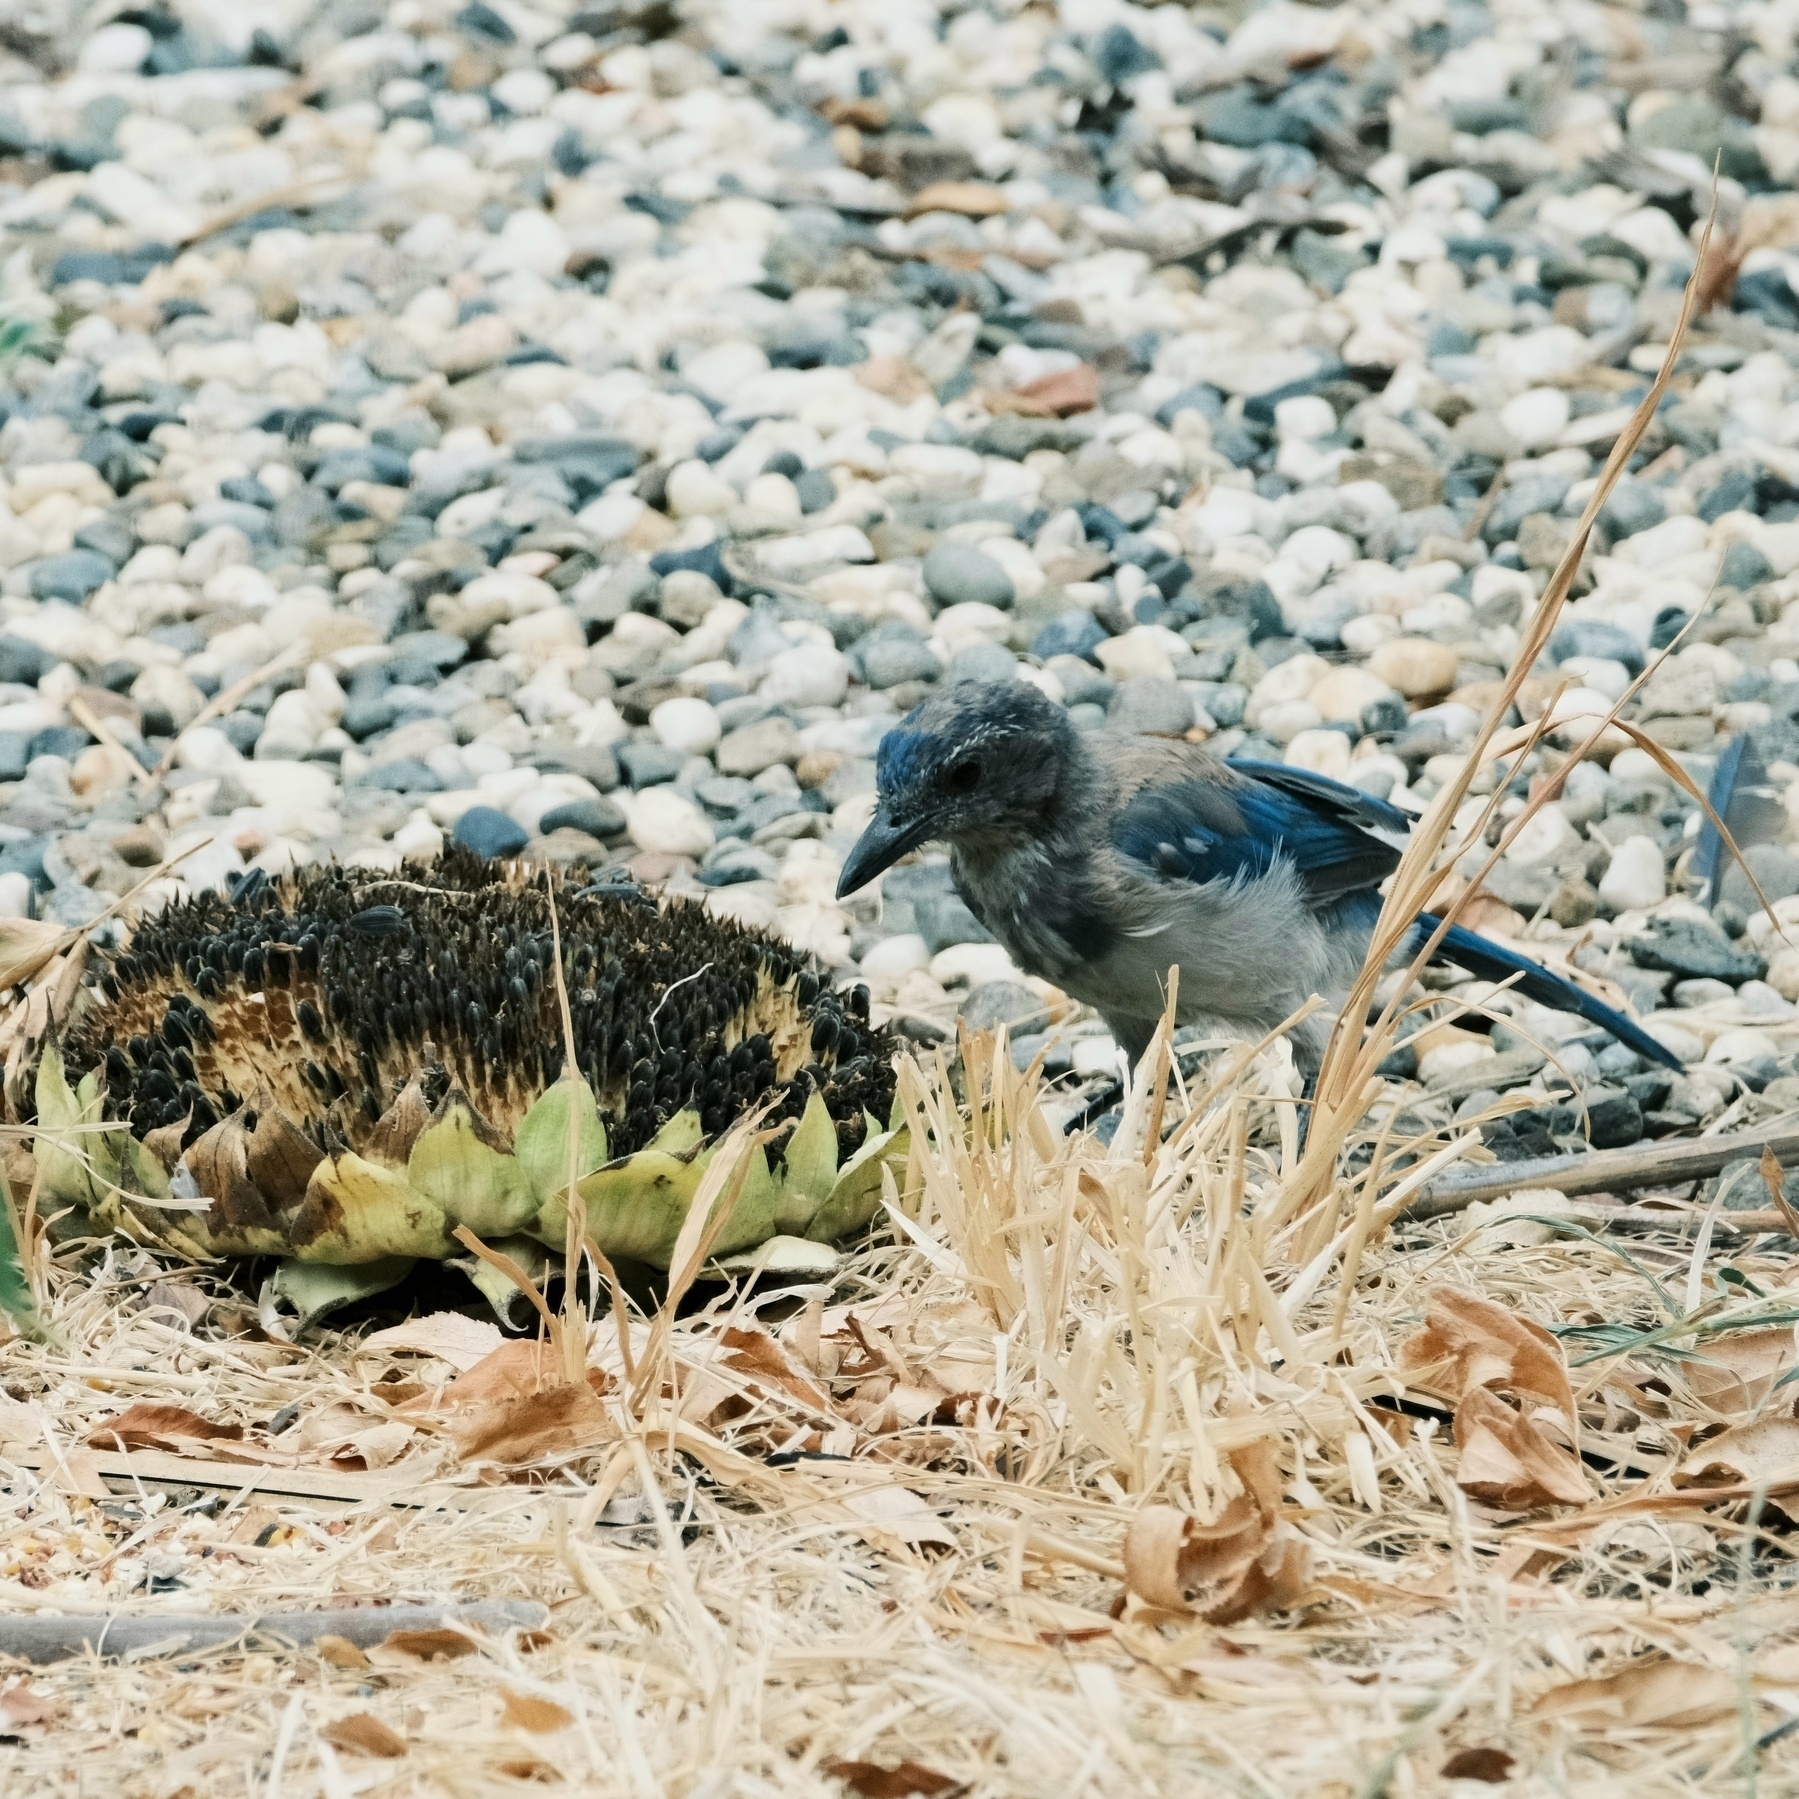 A juvenile Western Scrubjay looks down at a seed-filled sunflower head that’s on the ground. It is framed by a gravel pathway and some dry grass. Gray down is still on the bird’s back.